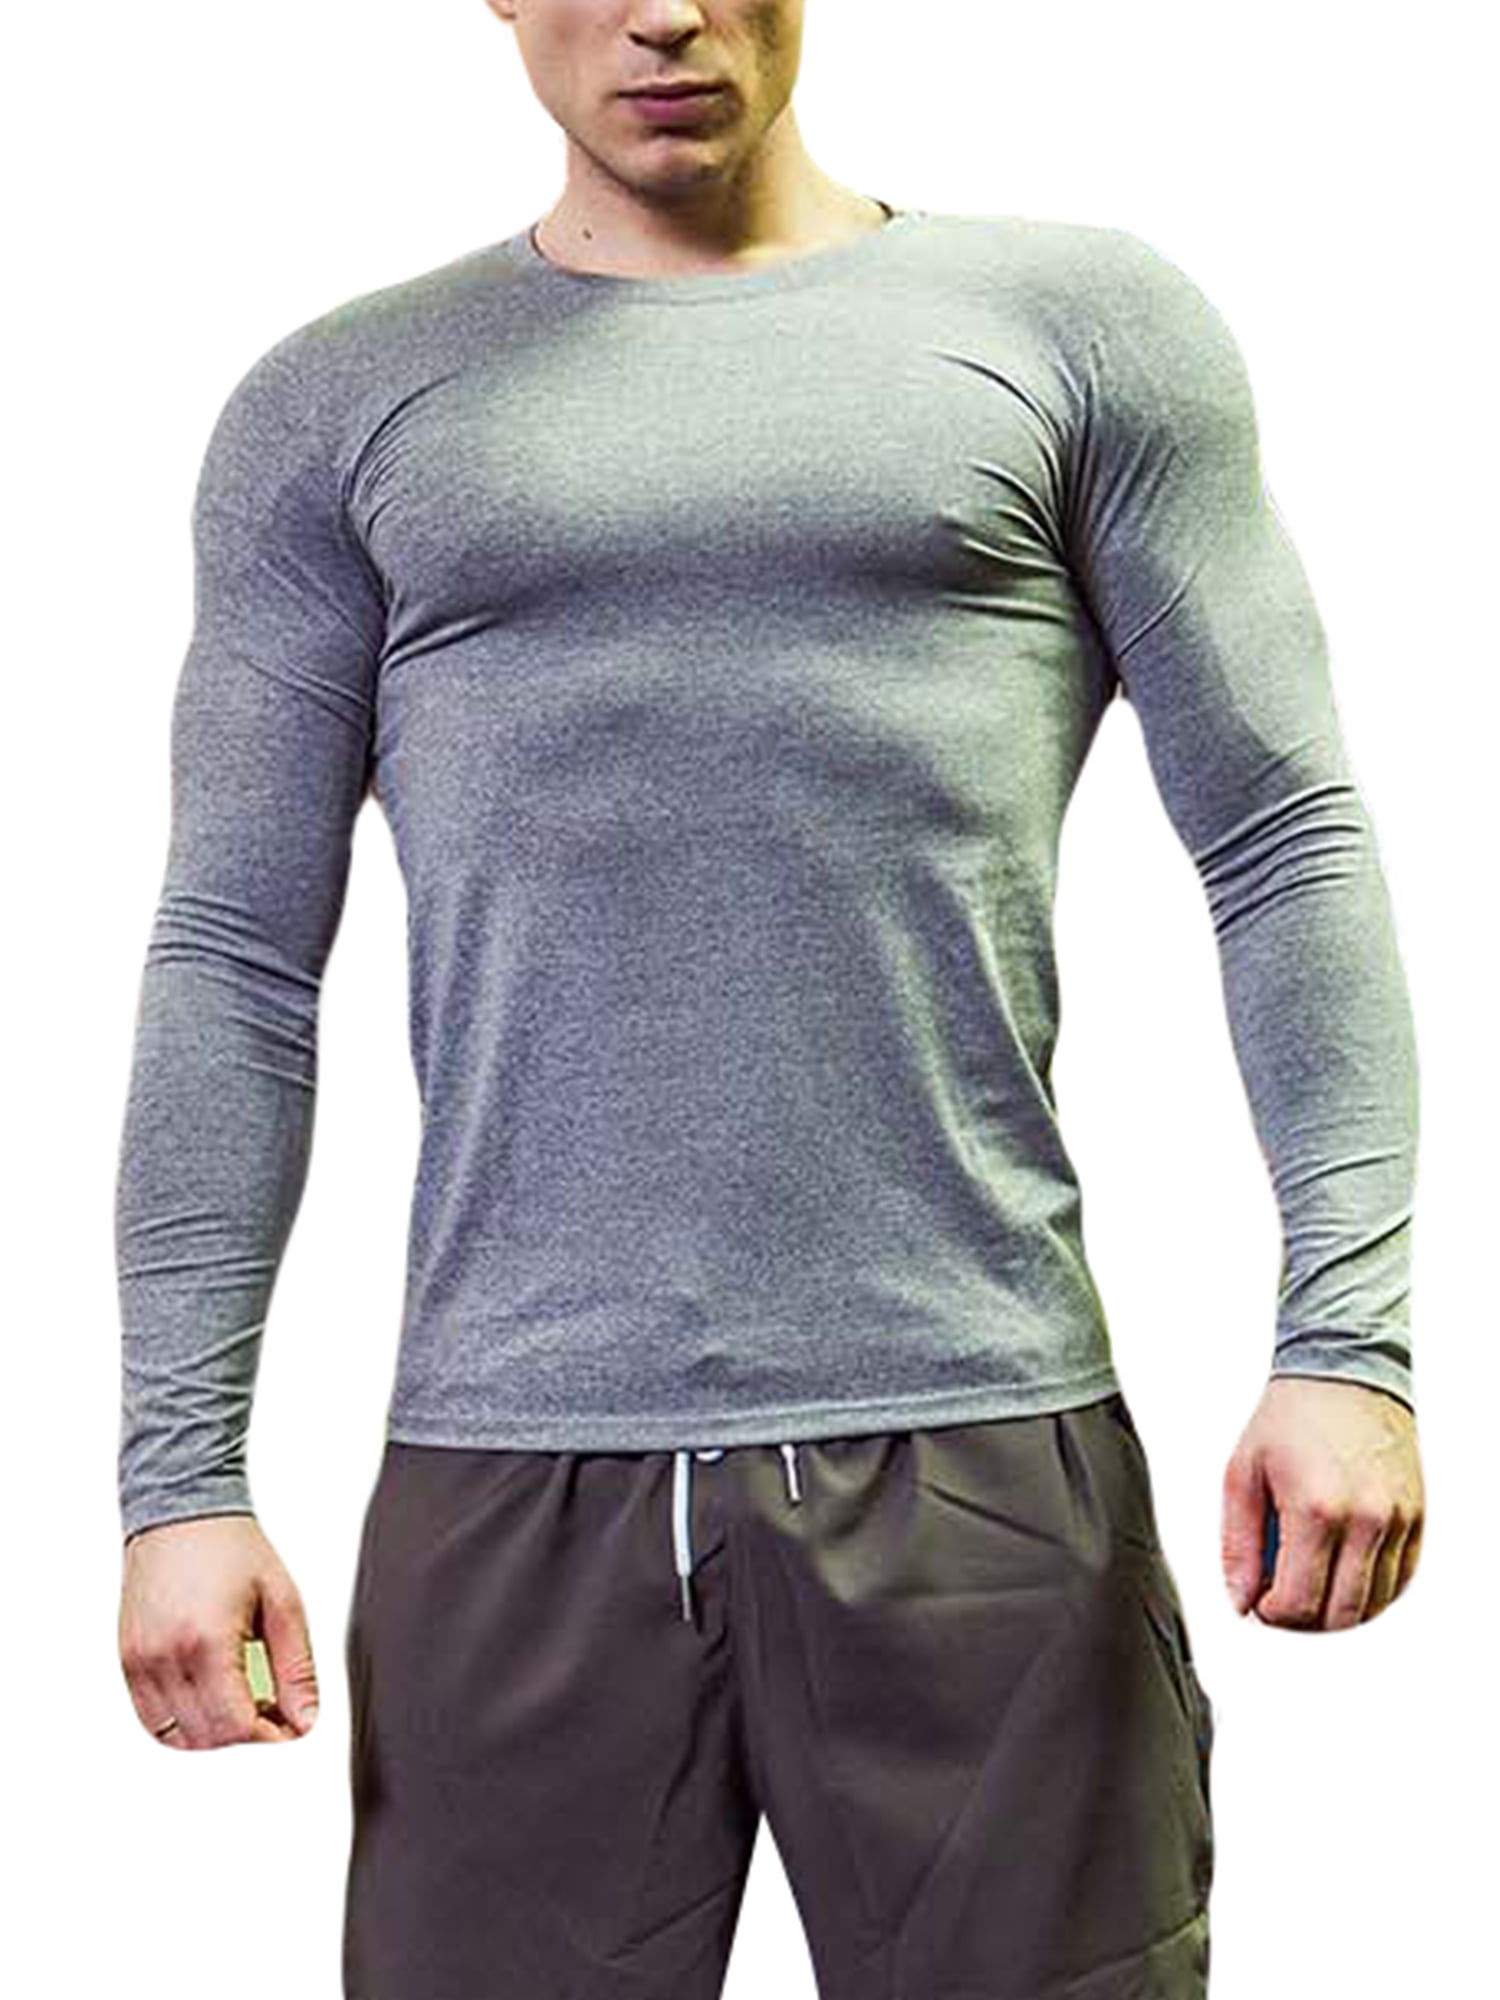 Details about   Men's Athletic Compression Tops Sports Gym Running Short Sleeves T-Shirt Tee 